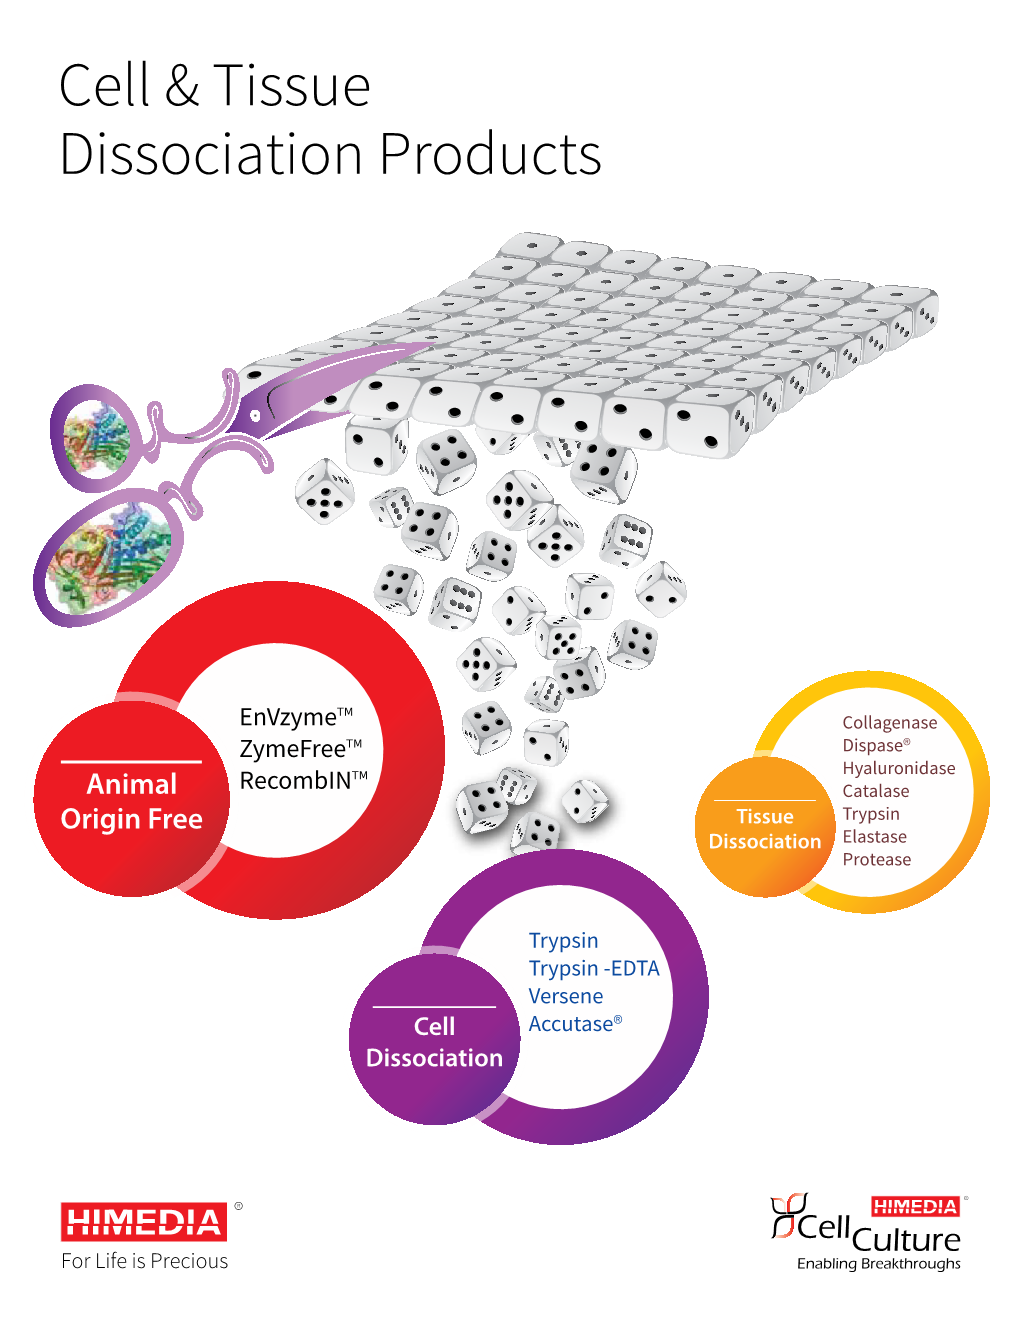 Cell & Tissue Dissociation Products